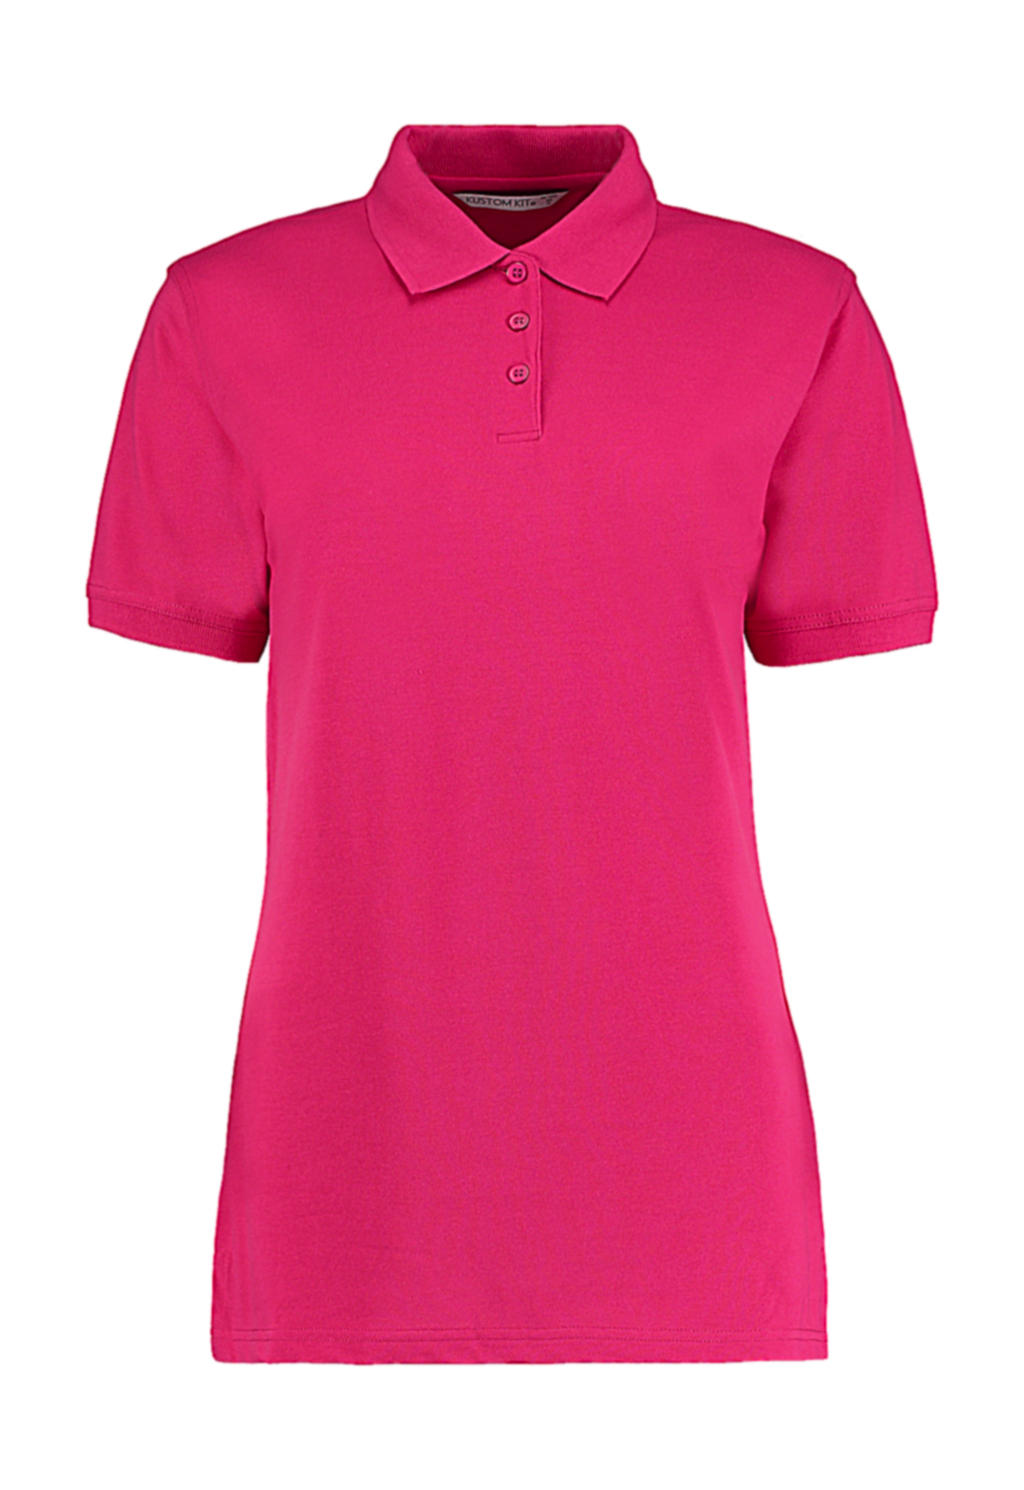  Ladies Classic Fit Polo Superwash? 60? in Farbe Raspberry